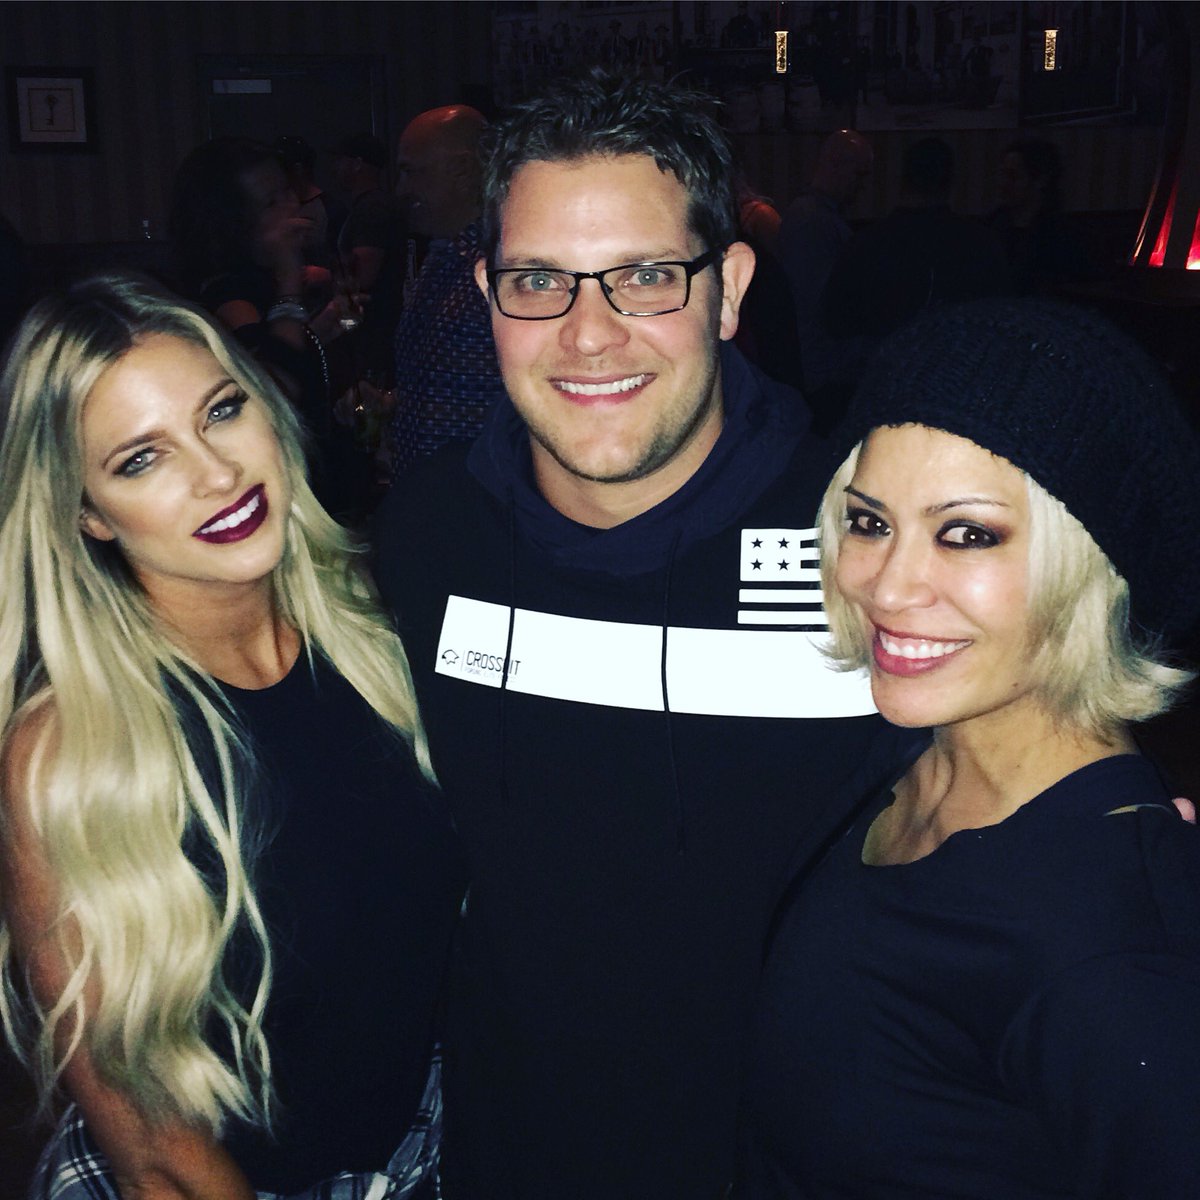 RT @JeremyPalko: With @TheBarbieBlank and @RealMelina So great hanging with you awesome ladies!! https://t.co/qN0I9AjkRp